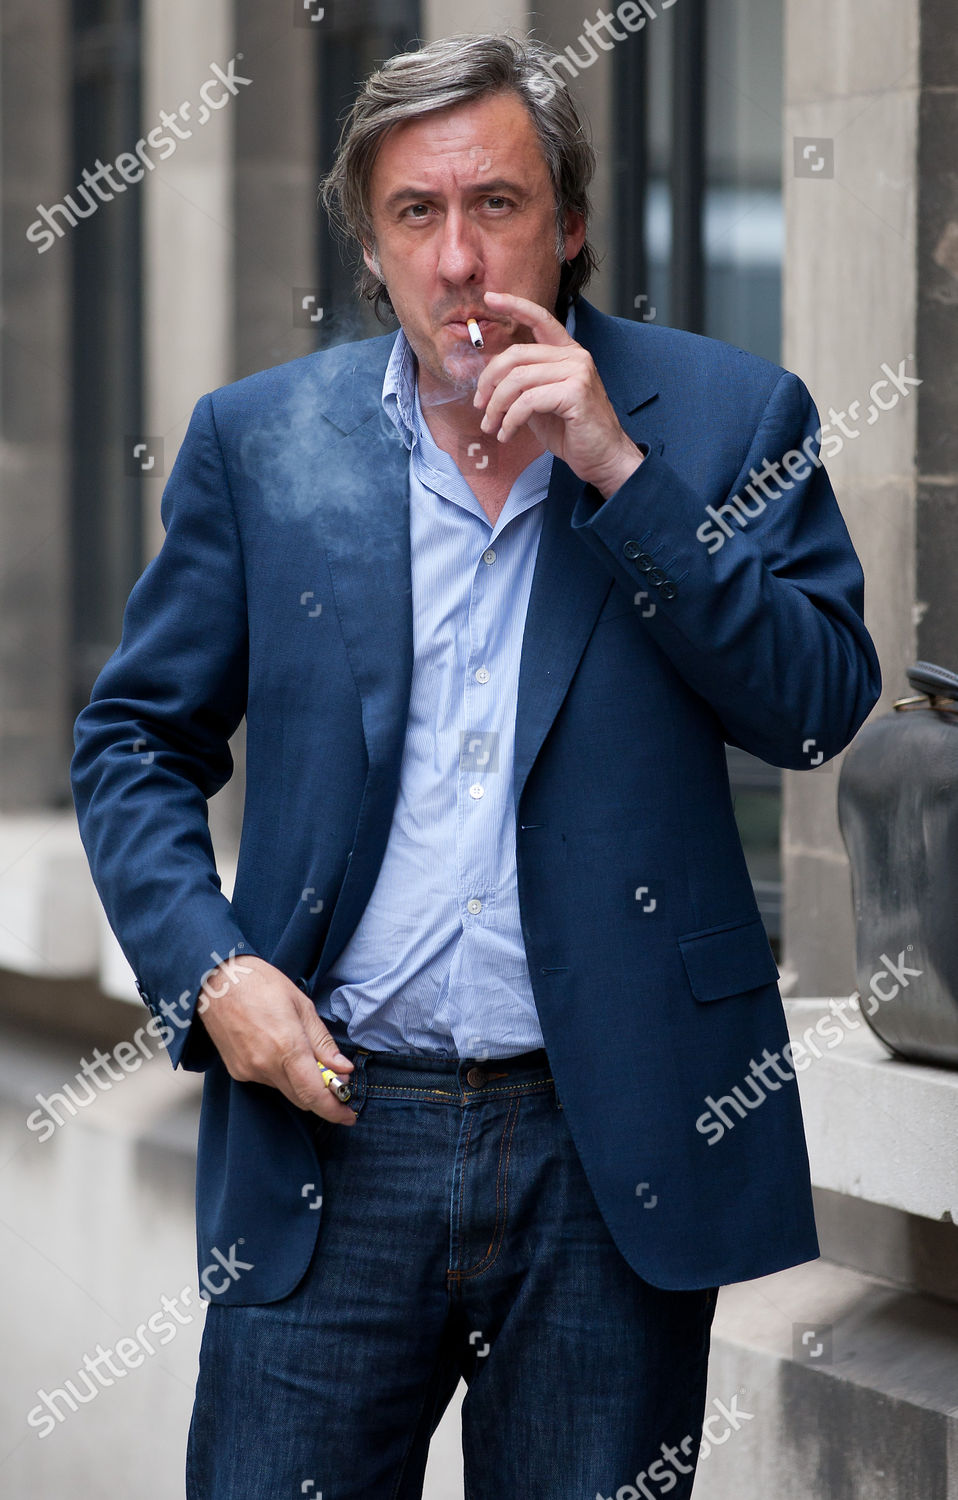 andrew-graham-dixon-out-and-about-in-west-london-britain-shutterstock-editorial-1379917a.jpg